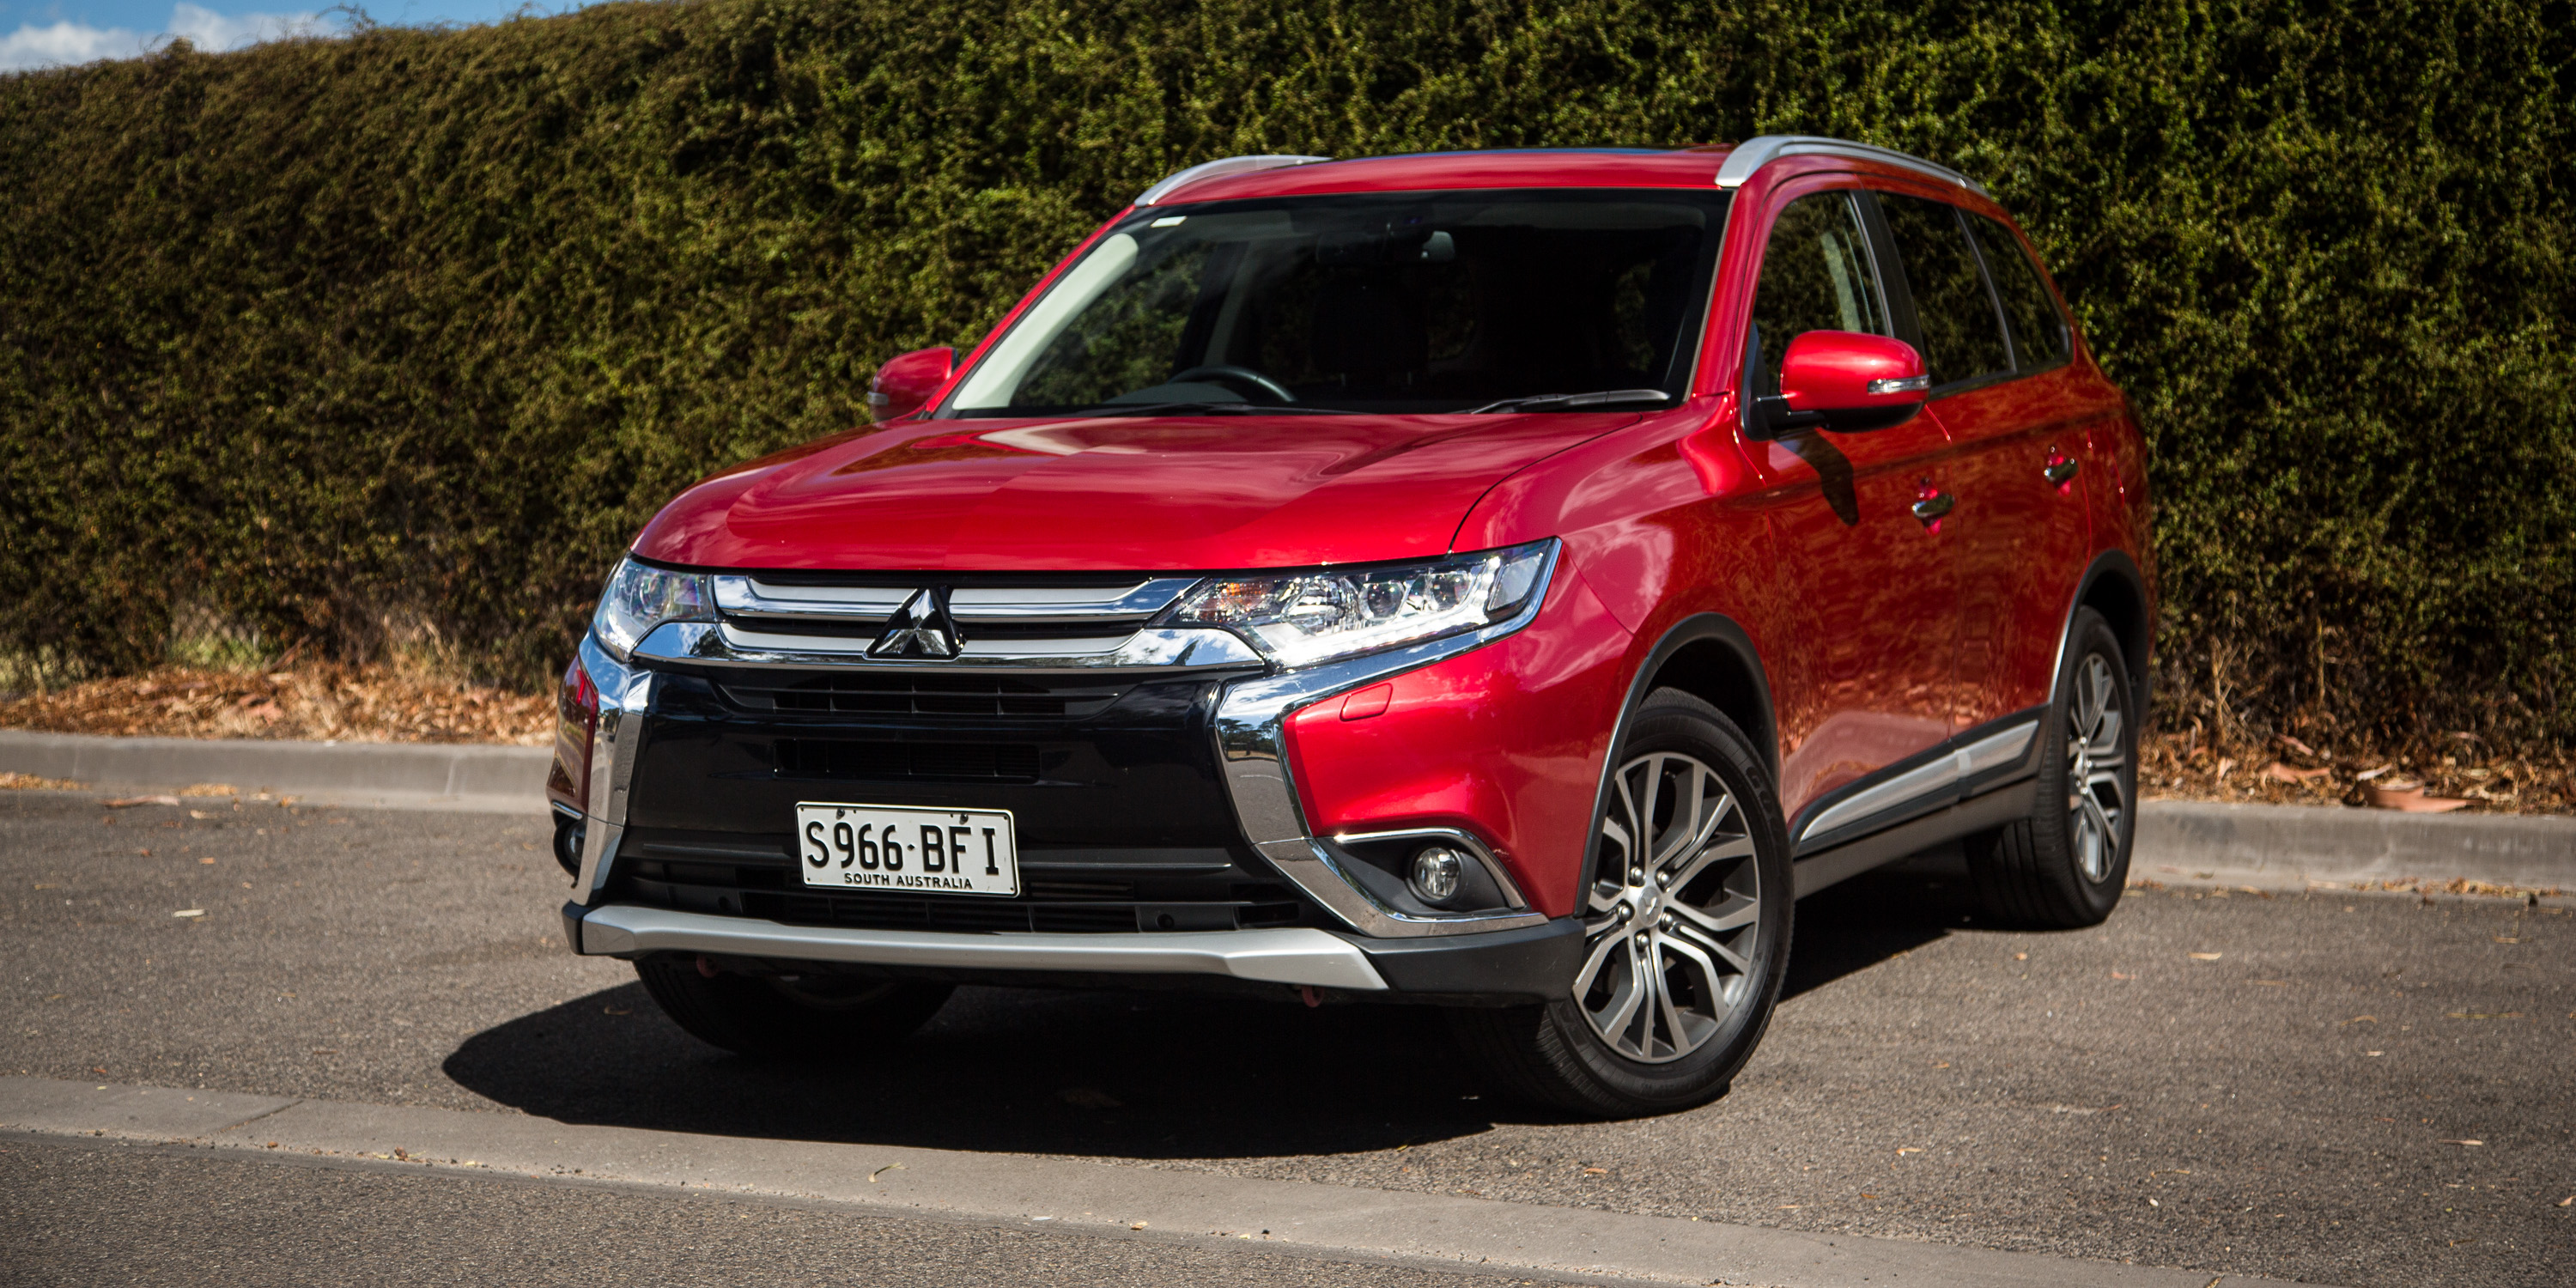 Mitsubishi outlander exceed review